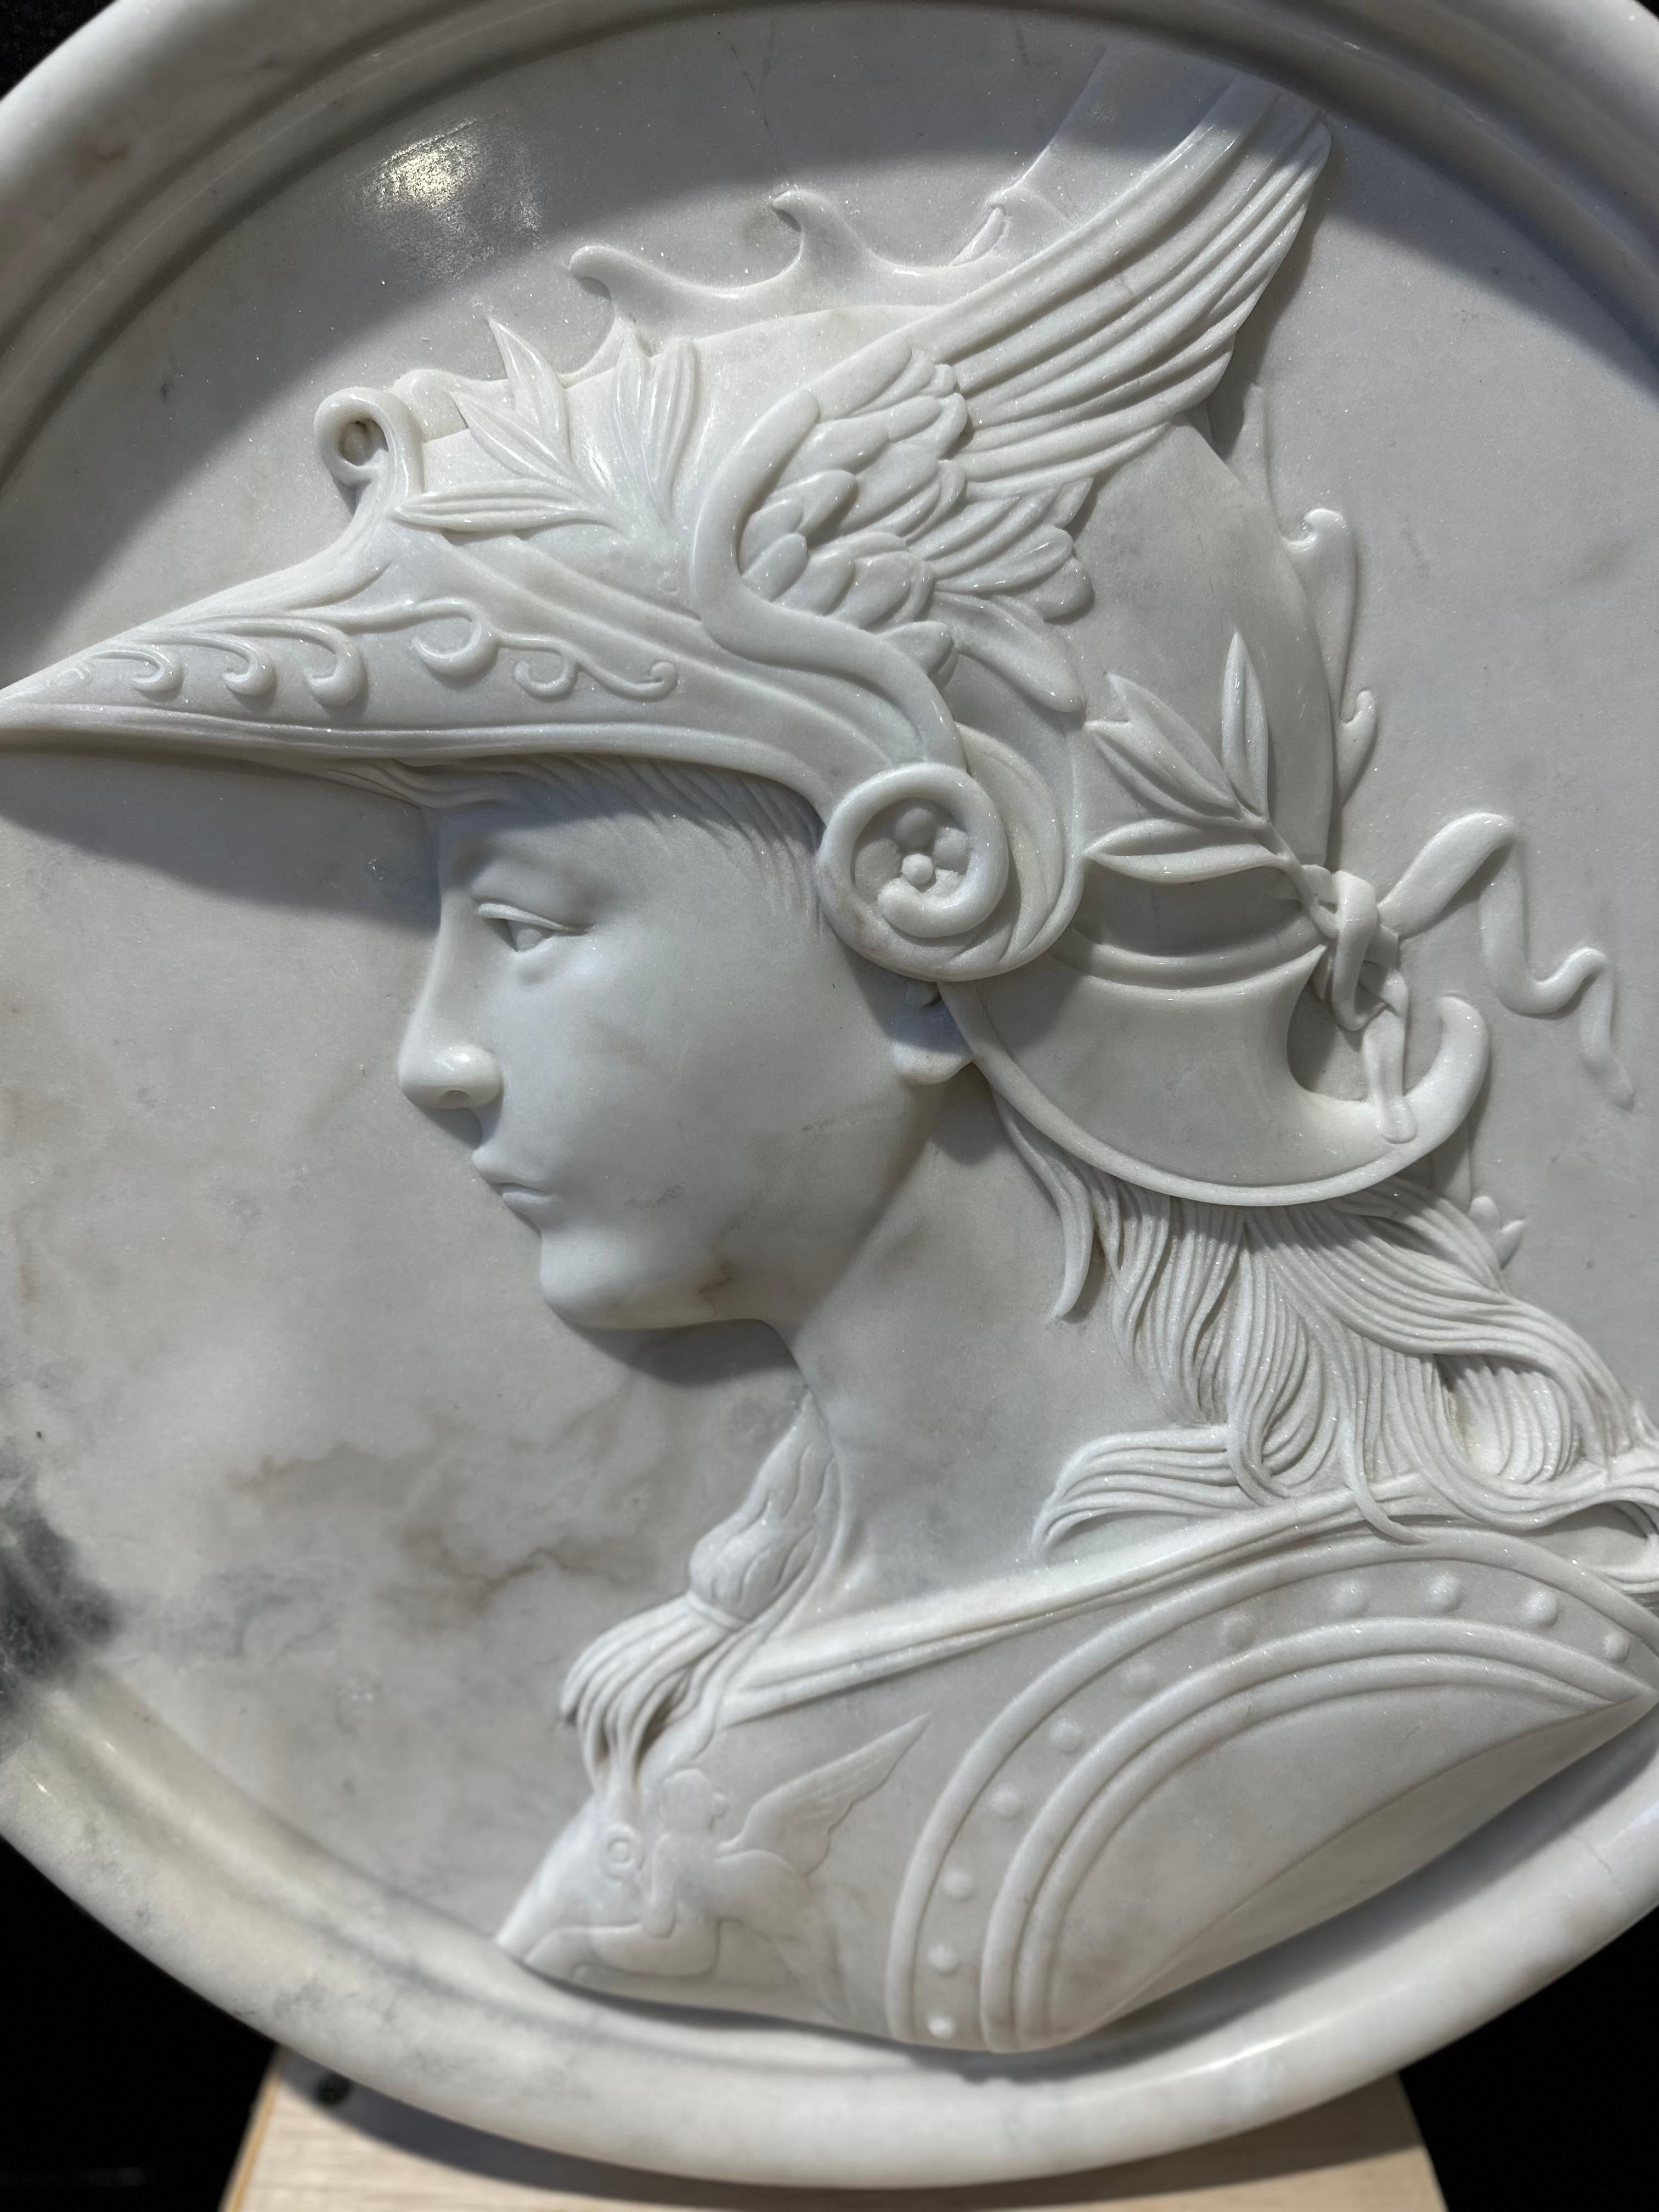 A skilfully and extremely decorative marble plaque wall carving of the Greek God Hermes (the Romans knew him as Mercury). God of trade, wealth, luck, fertility. The son of Zeus and Maia he was also the messenger of the Gods and the mediator between